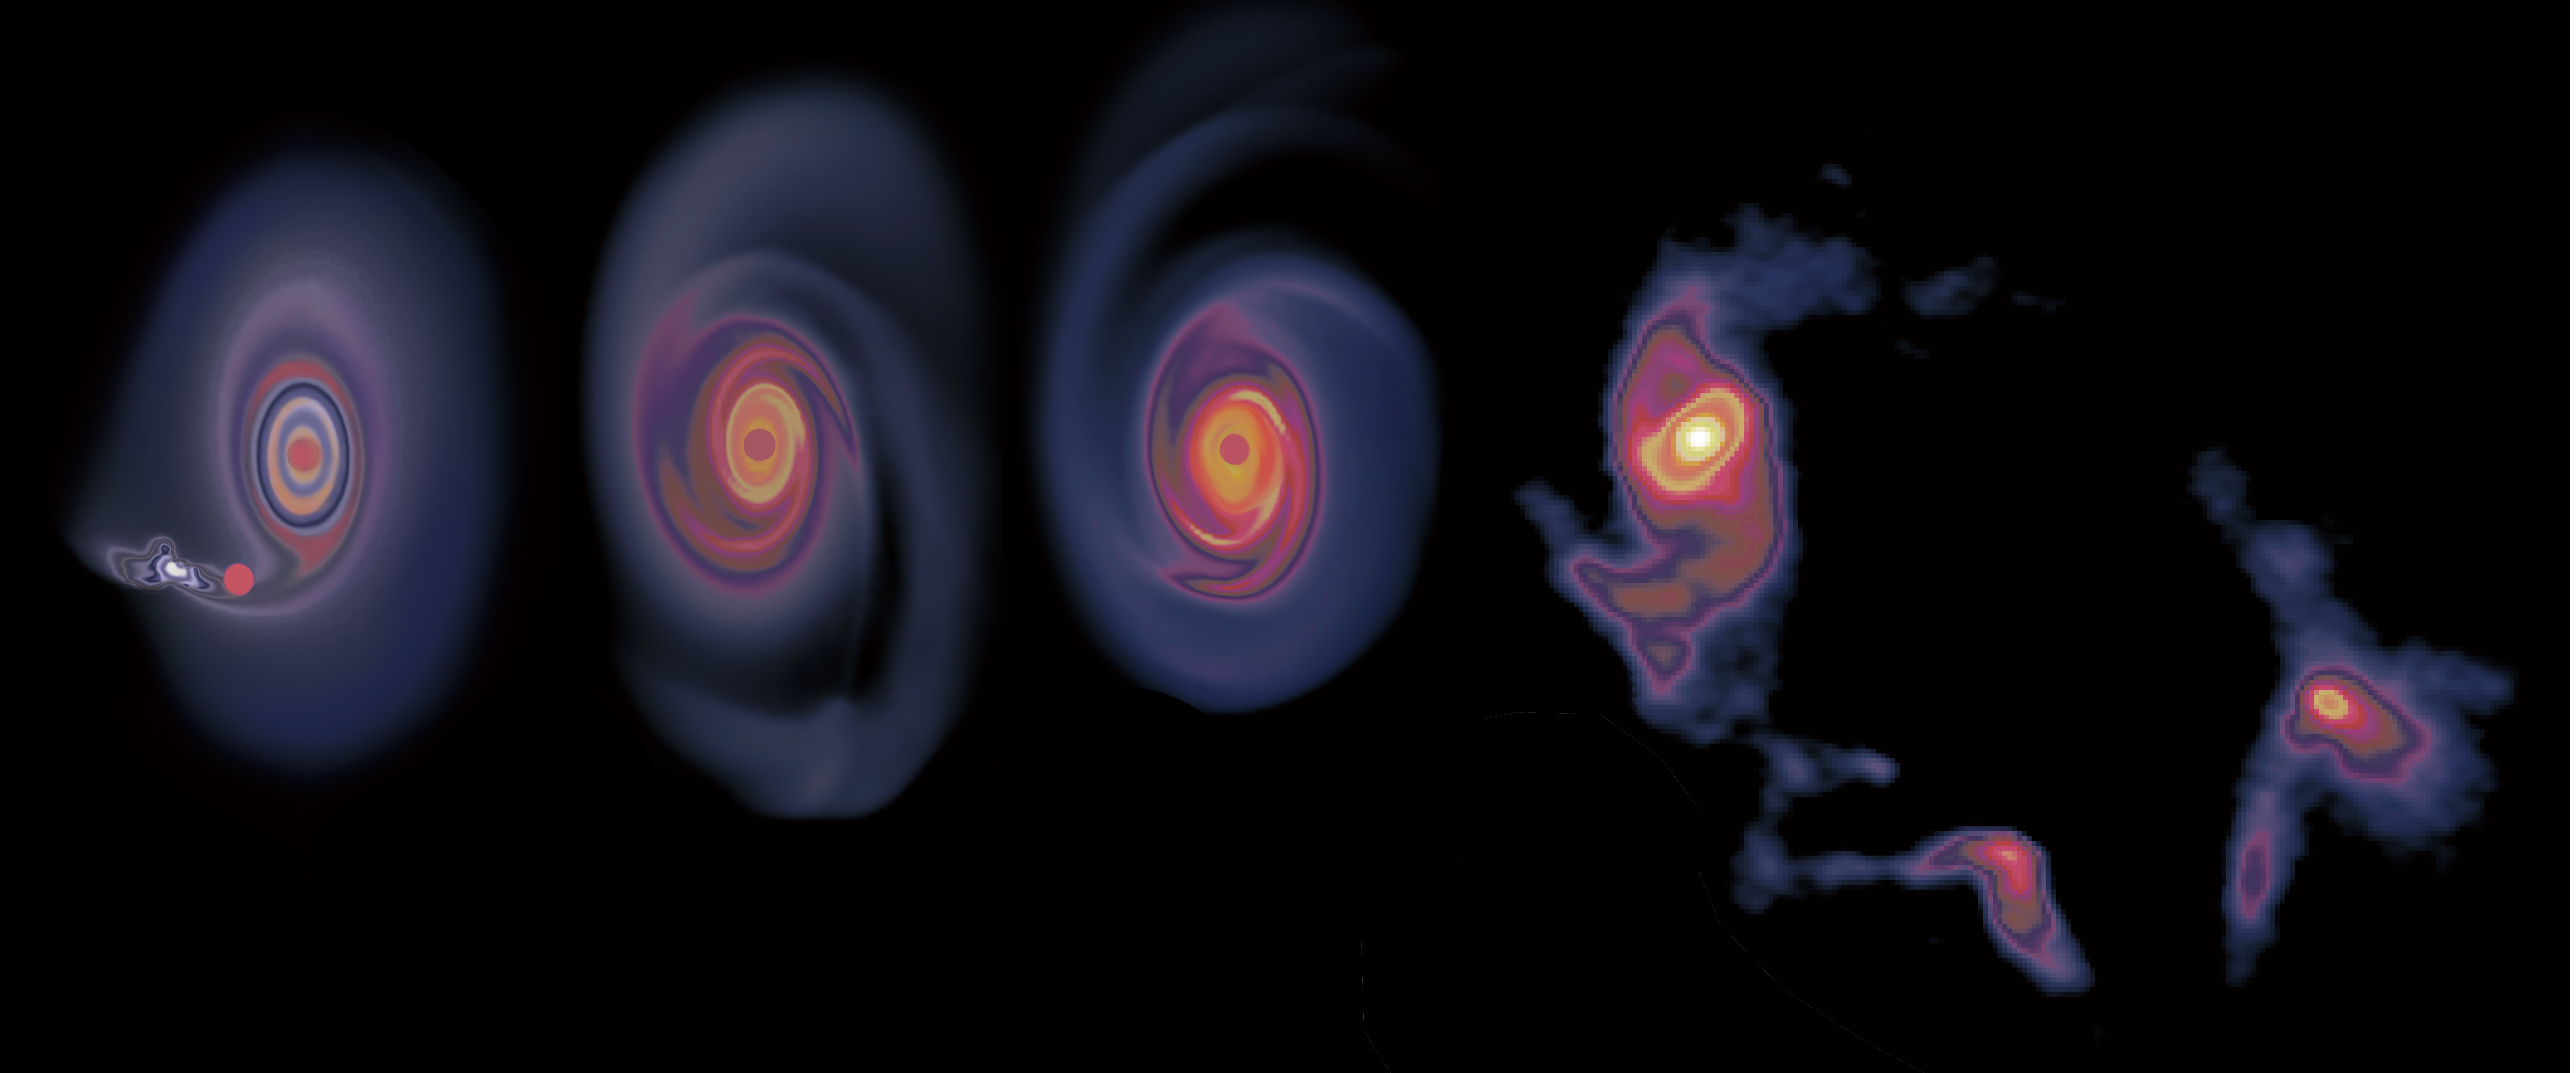 Close Encounter More Than 10,000 Years Ago Stirred up Spirals in Accretion Disk